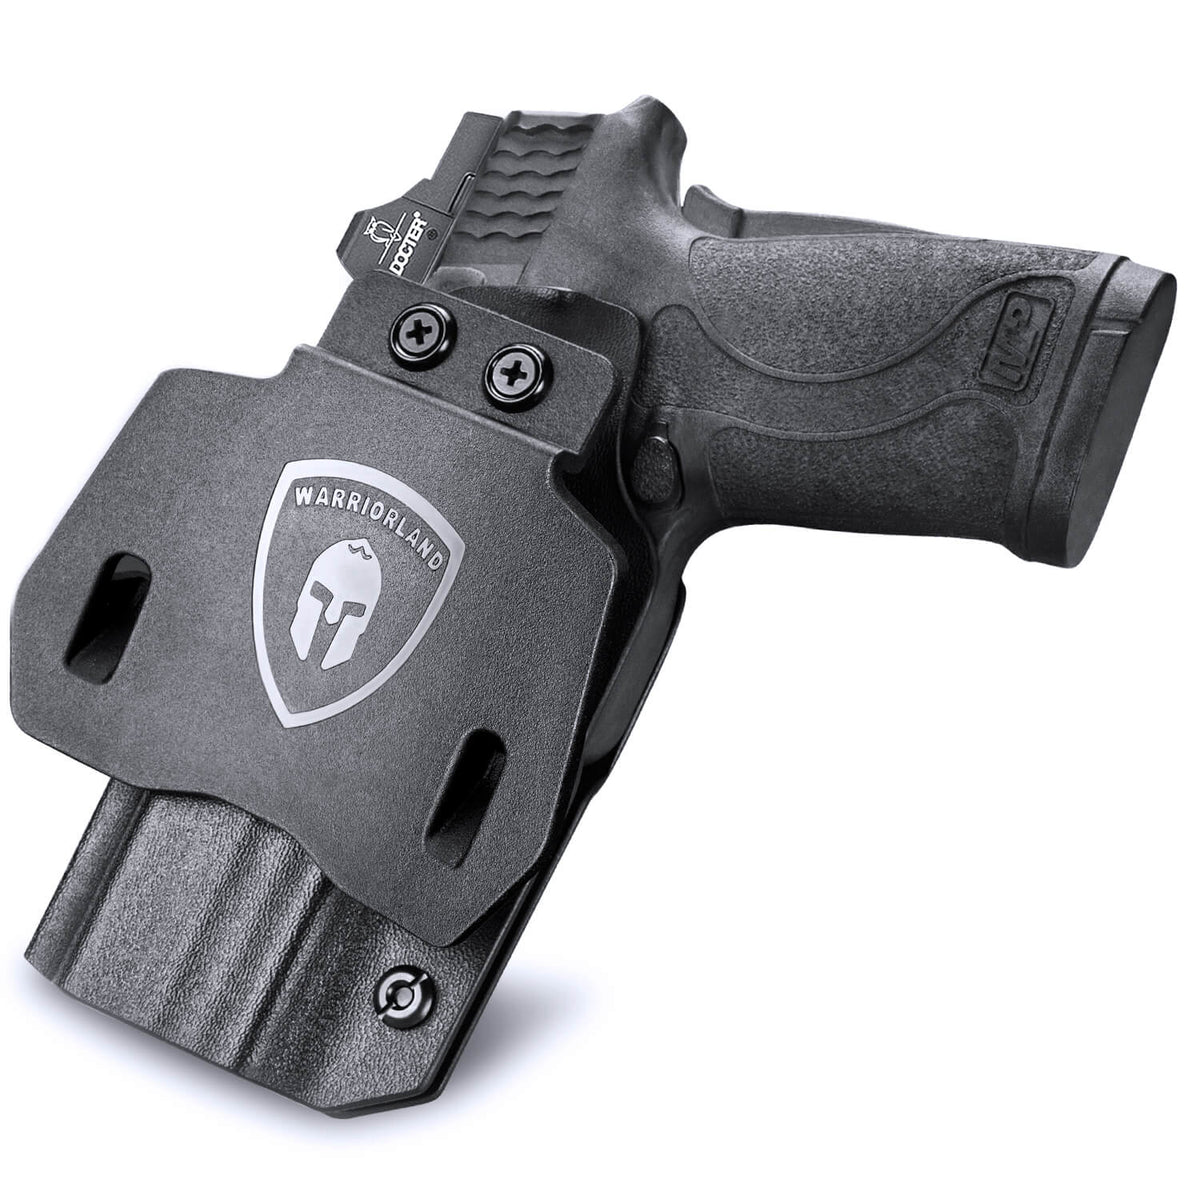 Kydex Appendix Open Carry OWB Paddle Holster with Red Dot Optics Cut for Smith & Wesson S&W M&P Shield 9mm 380 EZ Pistol Trigger Guard | WARRIORLAND